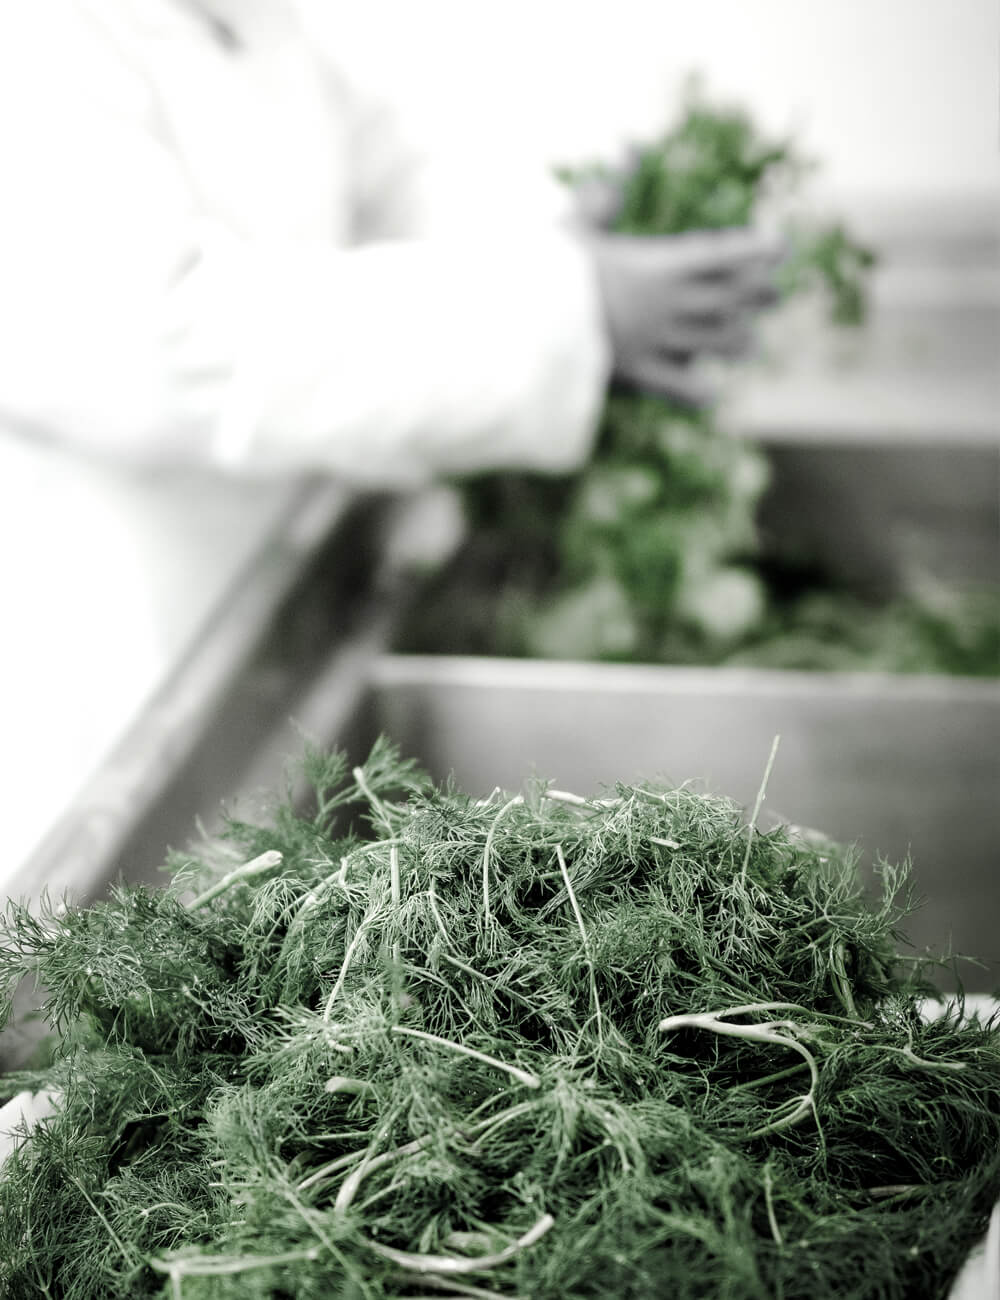 Brett Anthony Foods' Full-Service Prepared Foods Solution commercial kitchen with a worker washing fresh herbs, showcasing quality vendors and produce partners sourced.